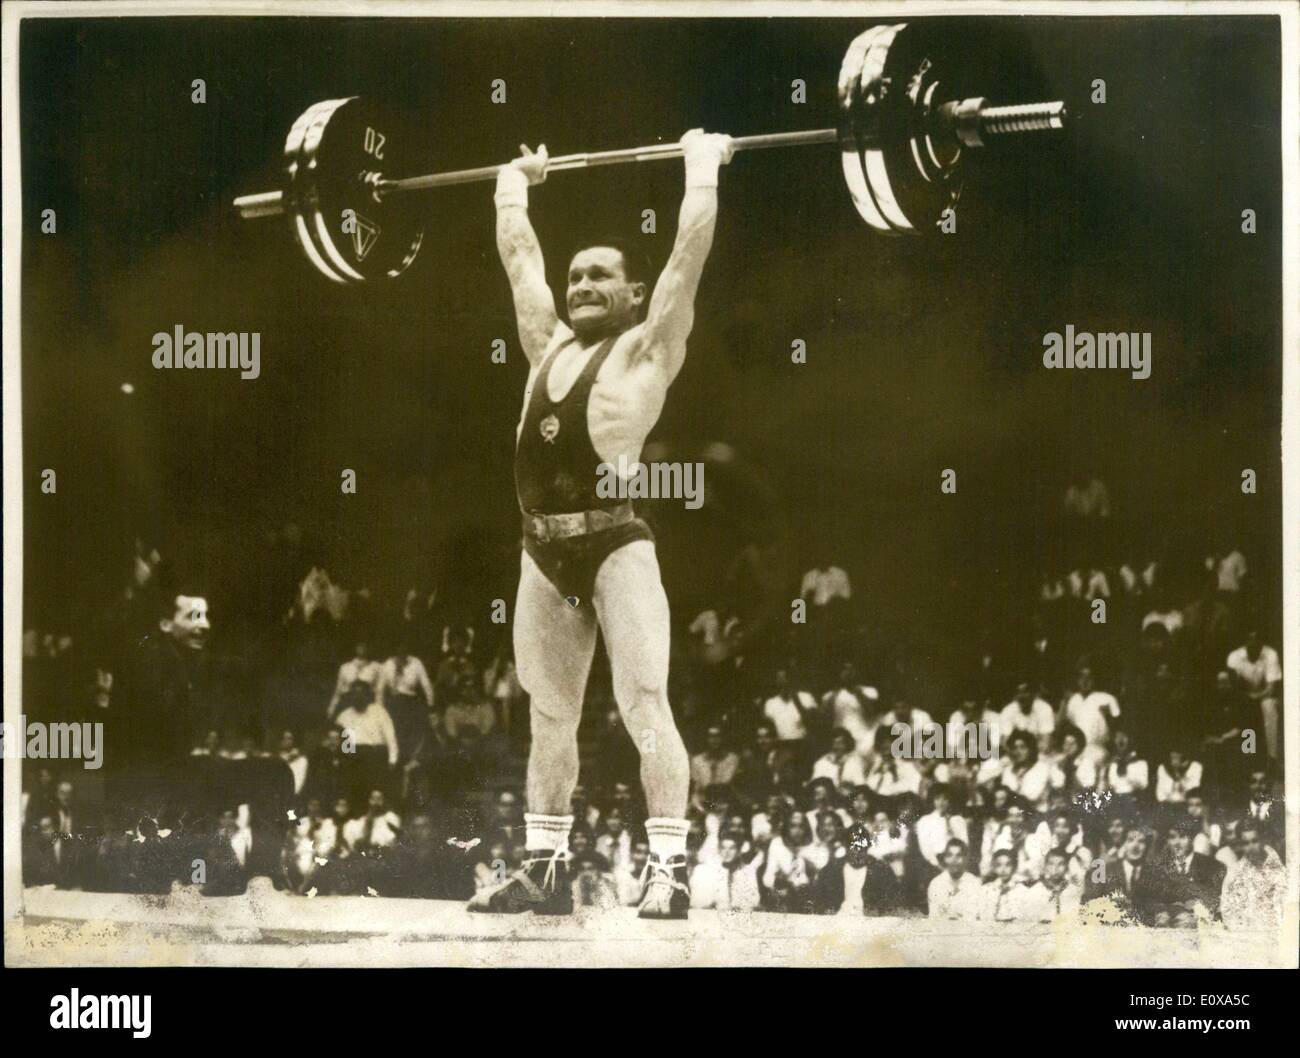 Oct. 28, 1965 - Hungarian weight lifer world Bantam weight champion: Hungarian Imre Foldi won the title of the Bantam Weight world champion at the weight lifting world championship now being held in Teheran. Photo shows Imre Foldi in action. Stock Photo